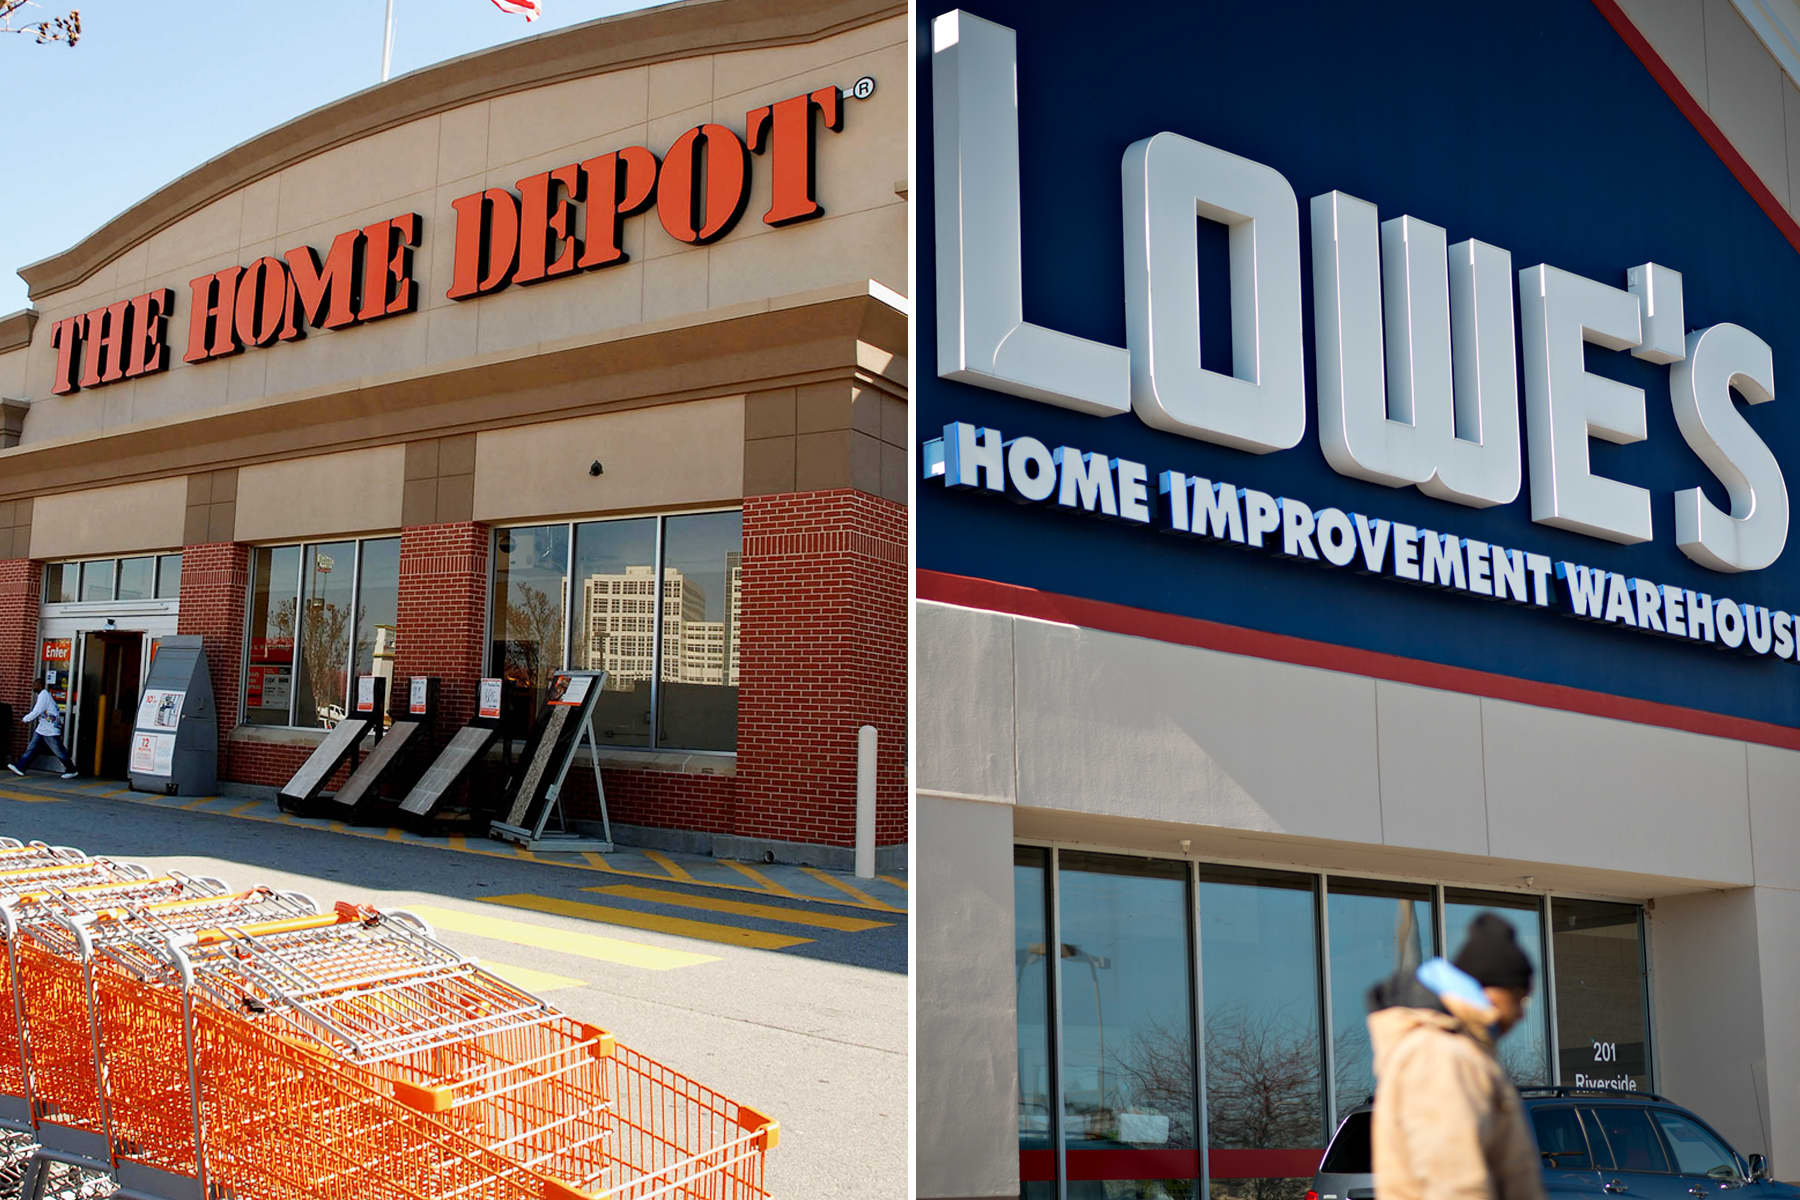 Home Depot is up. Lowe's is down. What's home improvement telling